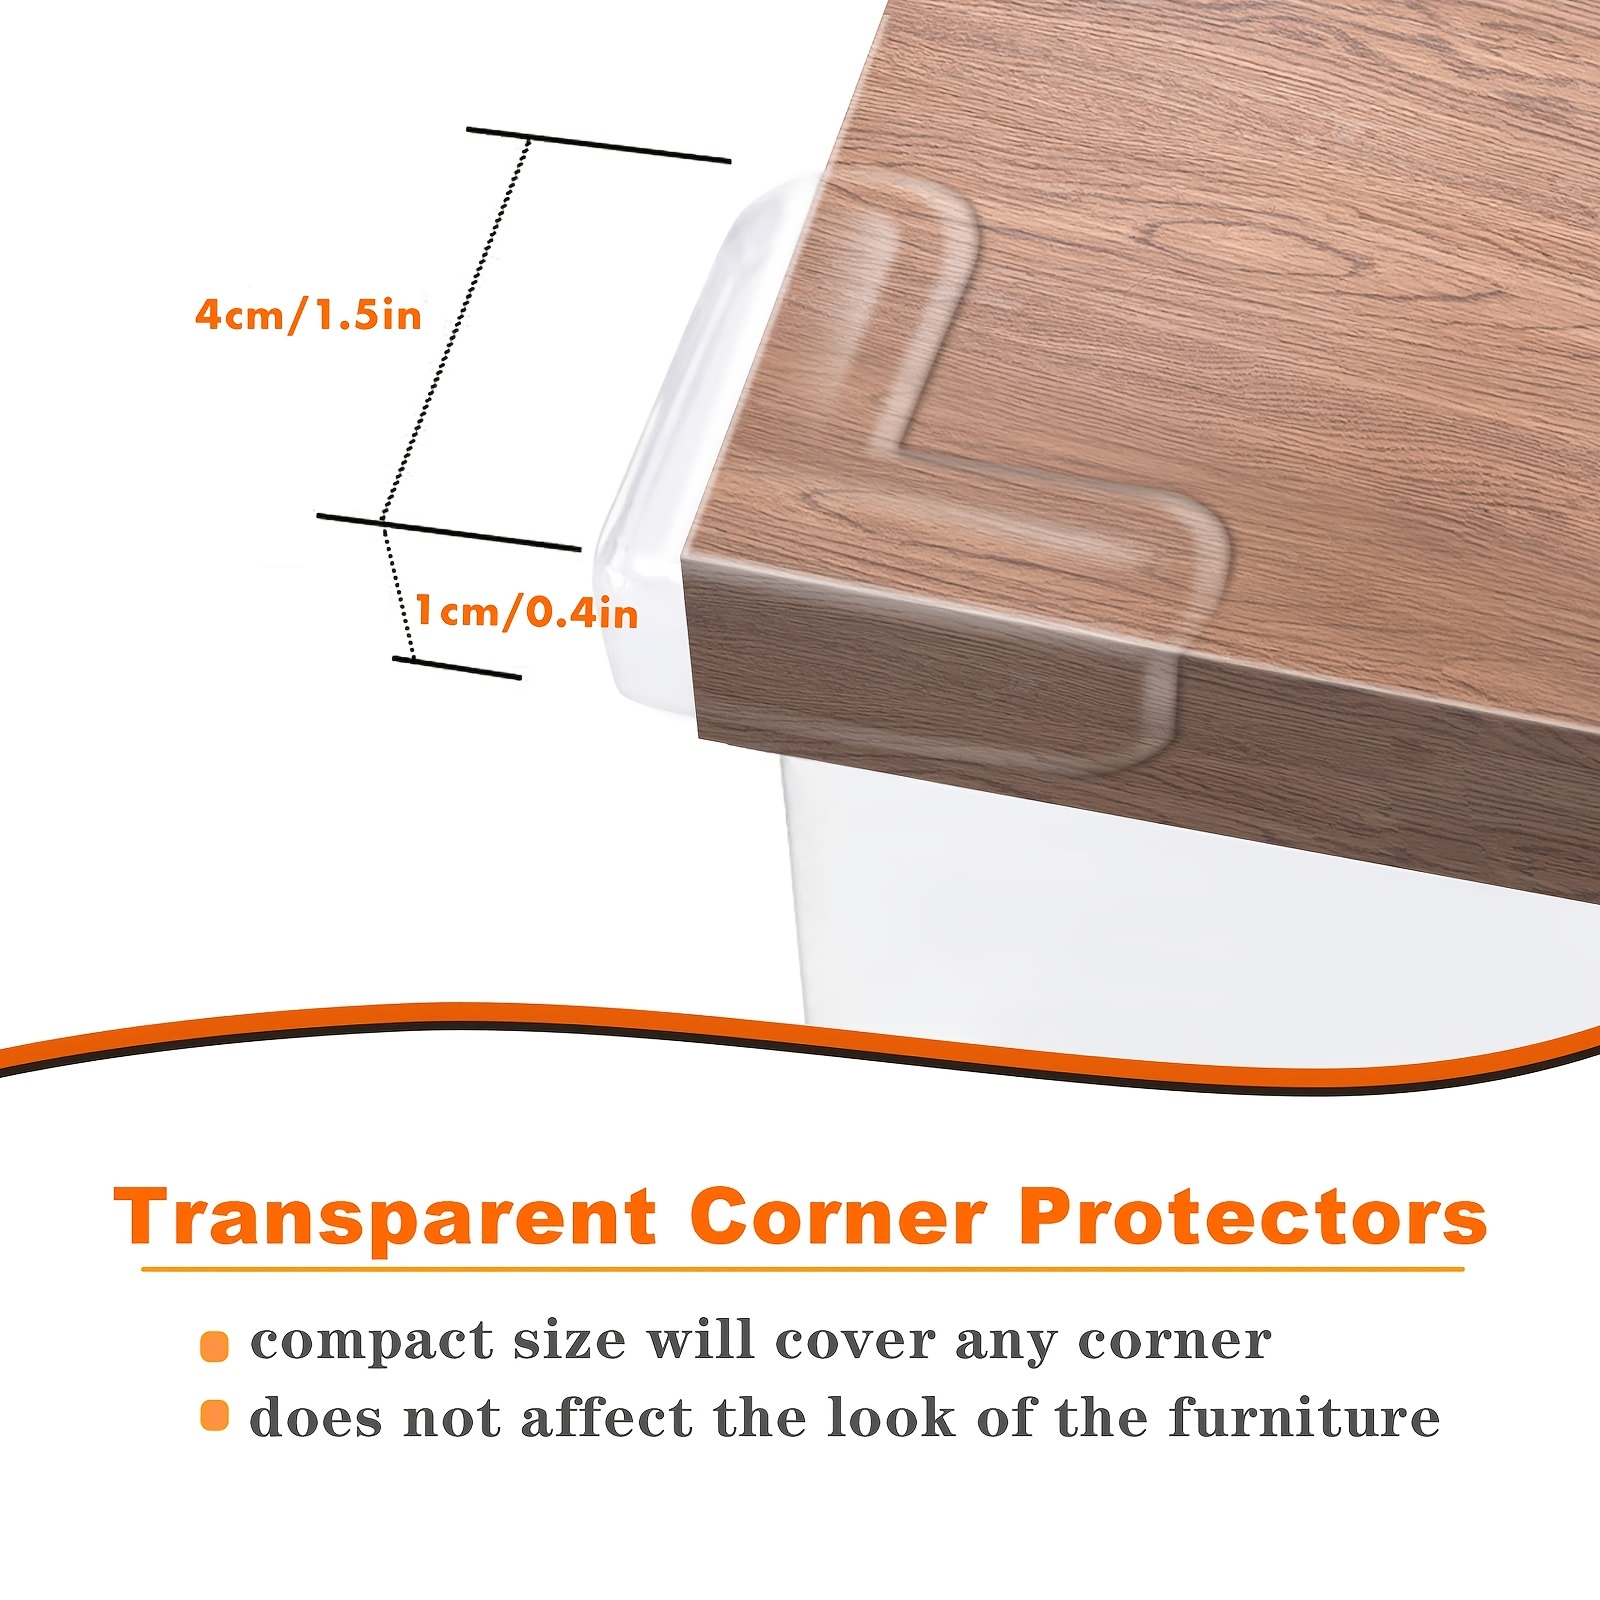 Corner Protector for Baby, Protectors Guards - Furniture Corner Guard & Edge  Safety Bumpers - Baby Proof Bumper & Cushion to Cover Sharp Furniture & Table  Edges - Clear and Transparent (8